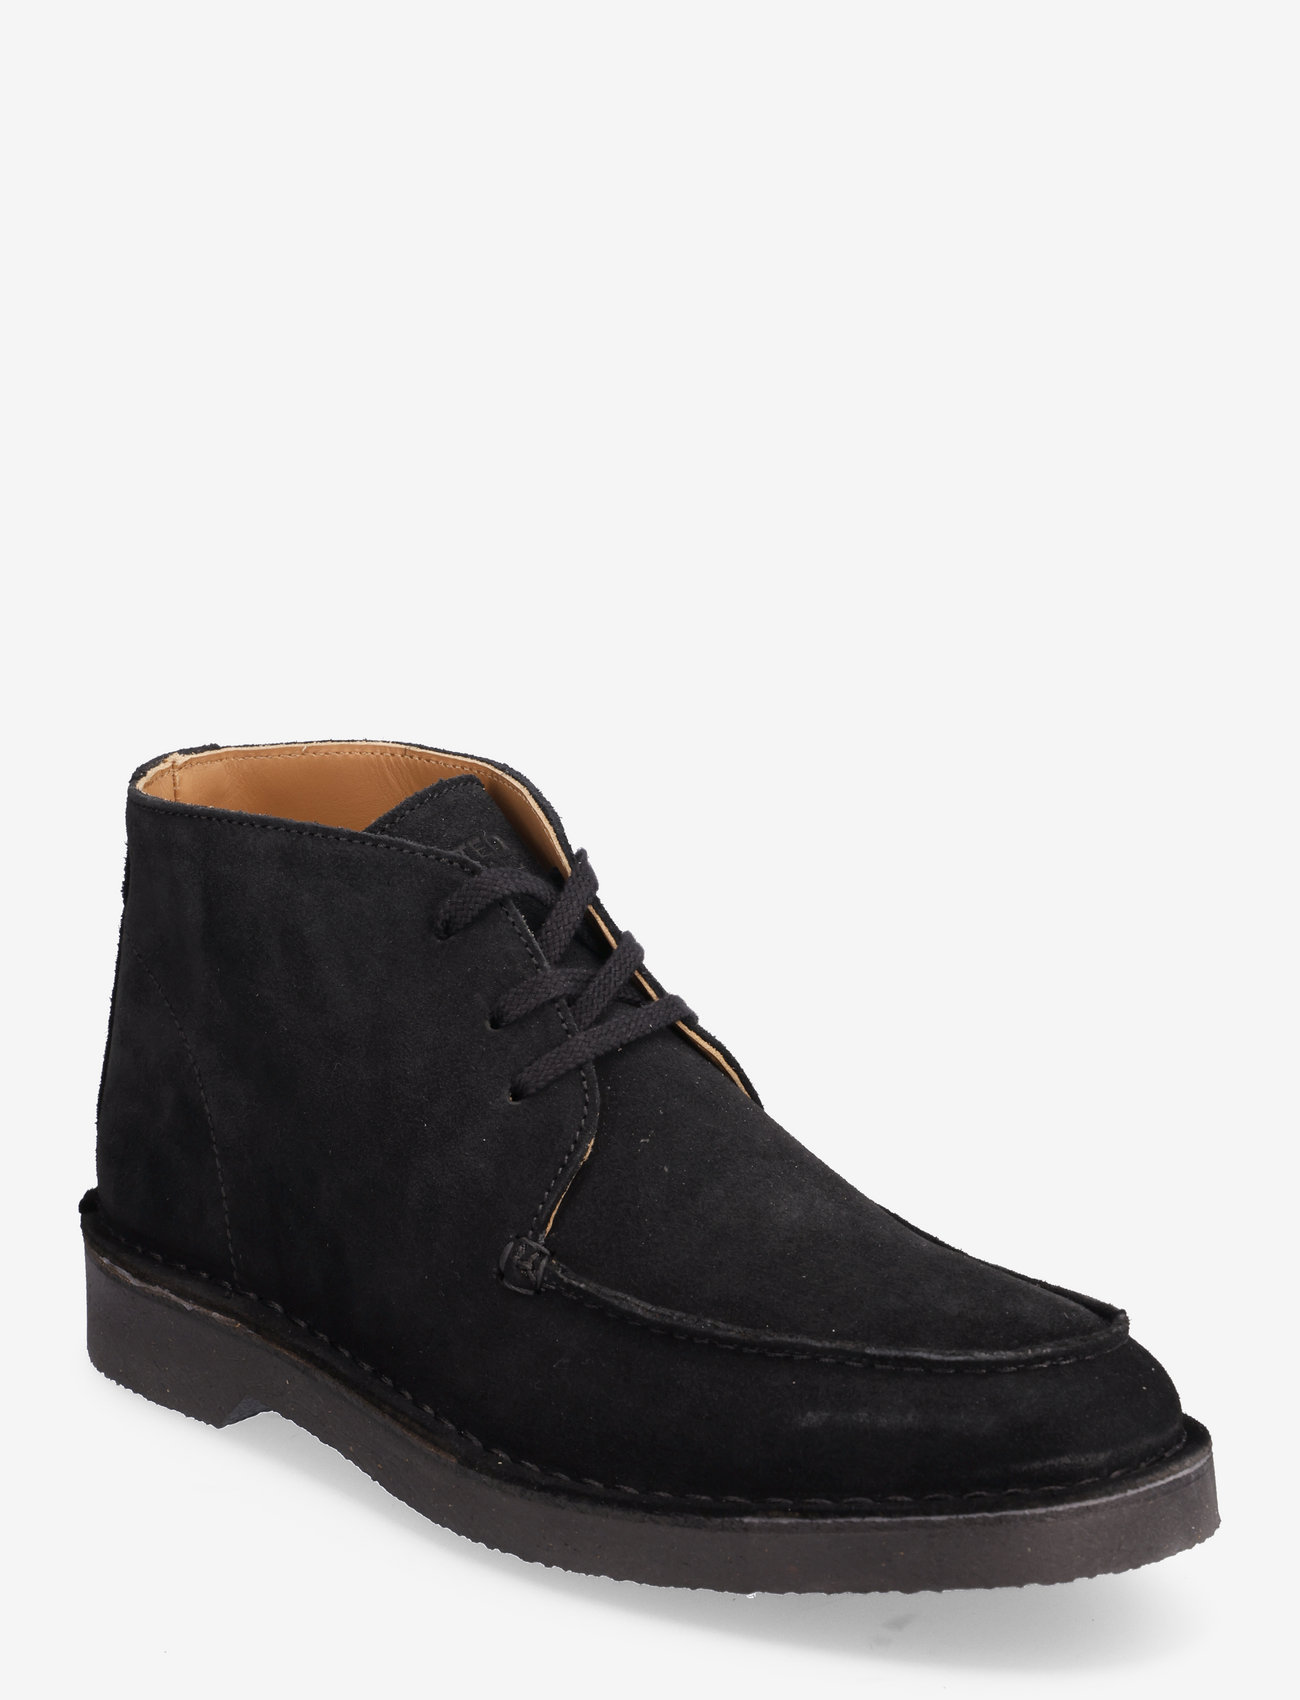 Selected Homme - SLHRIGA NEW SUEDE MOC-TOE CHUKKA B - desert boots - black - 0